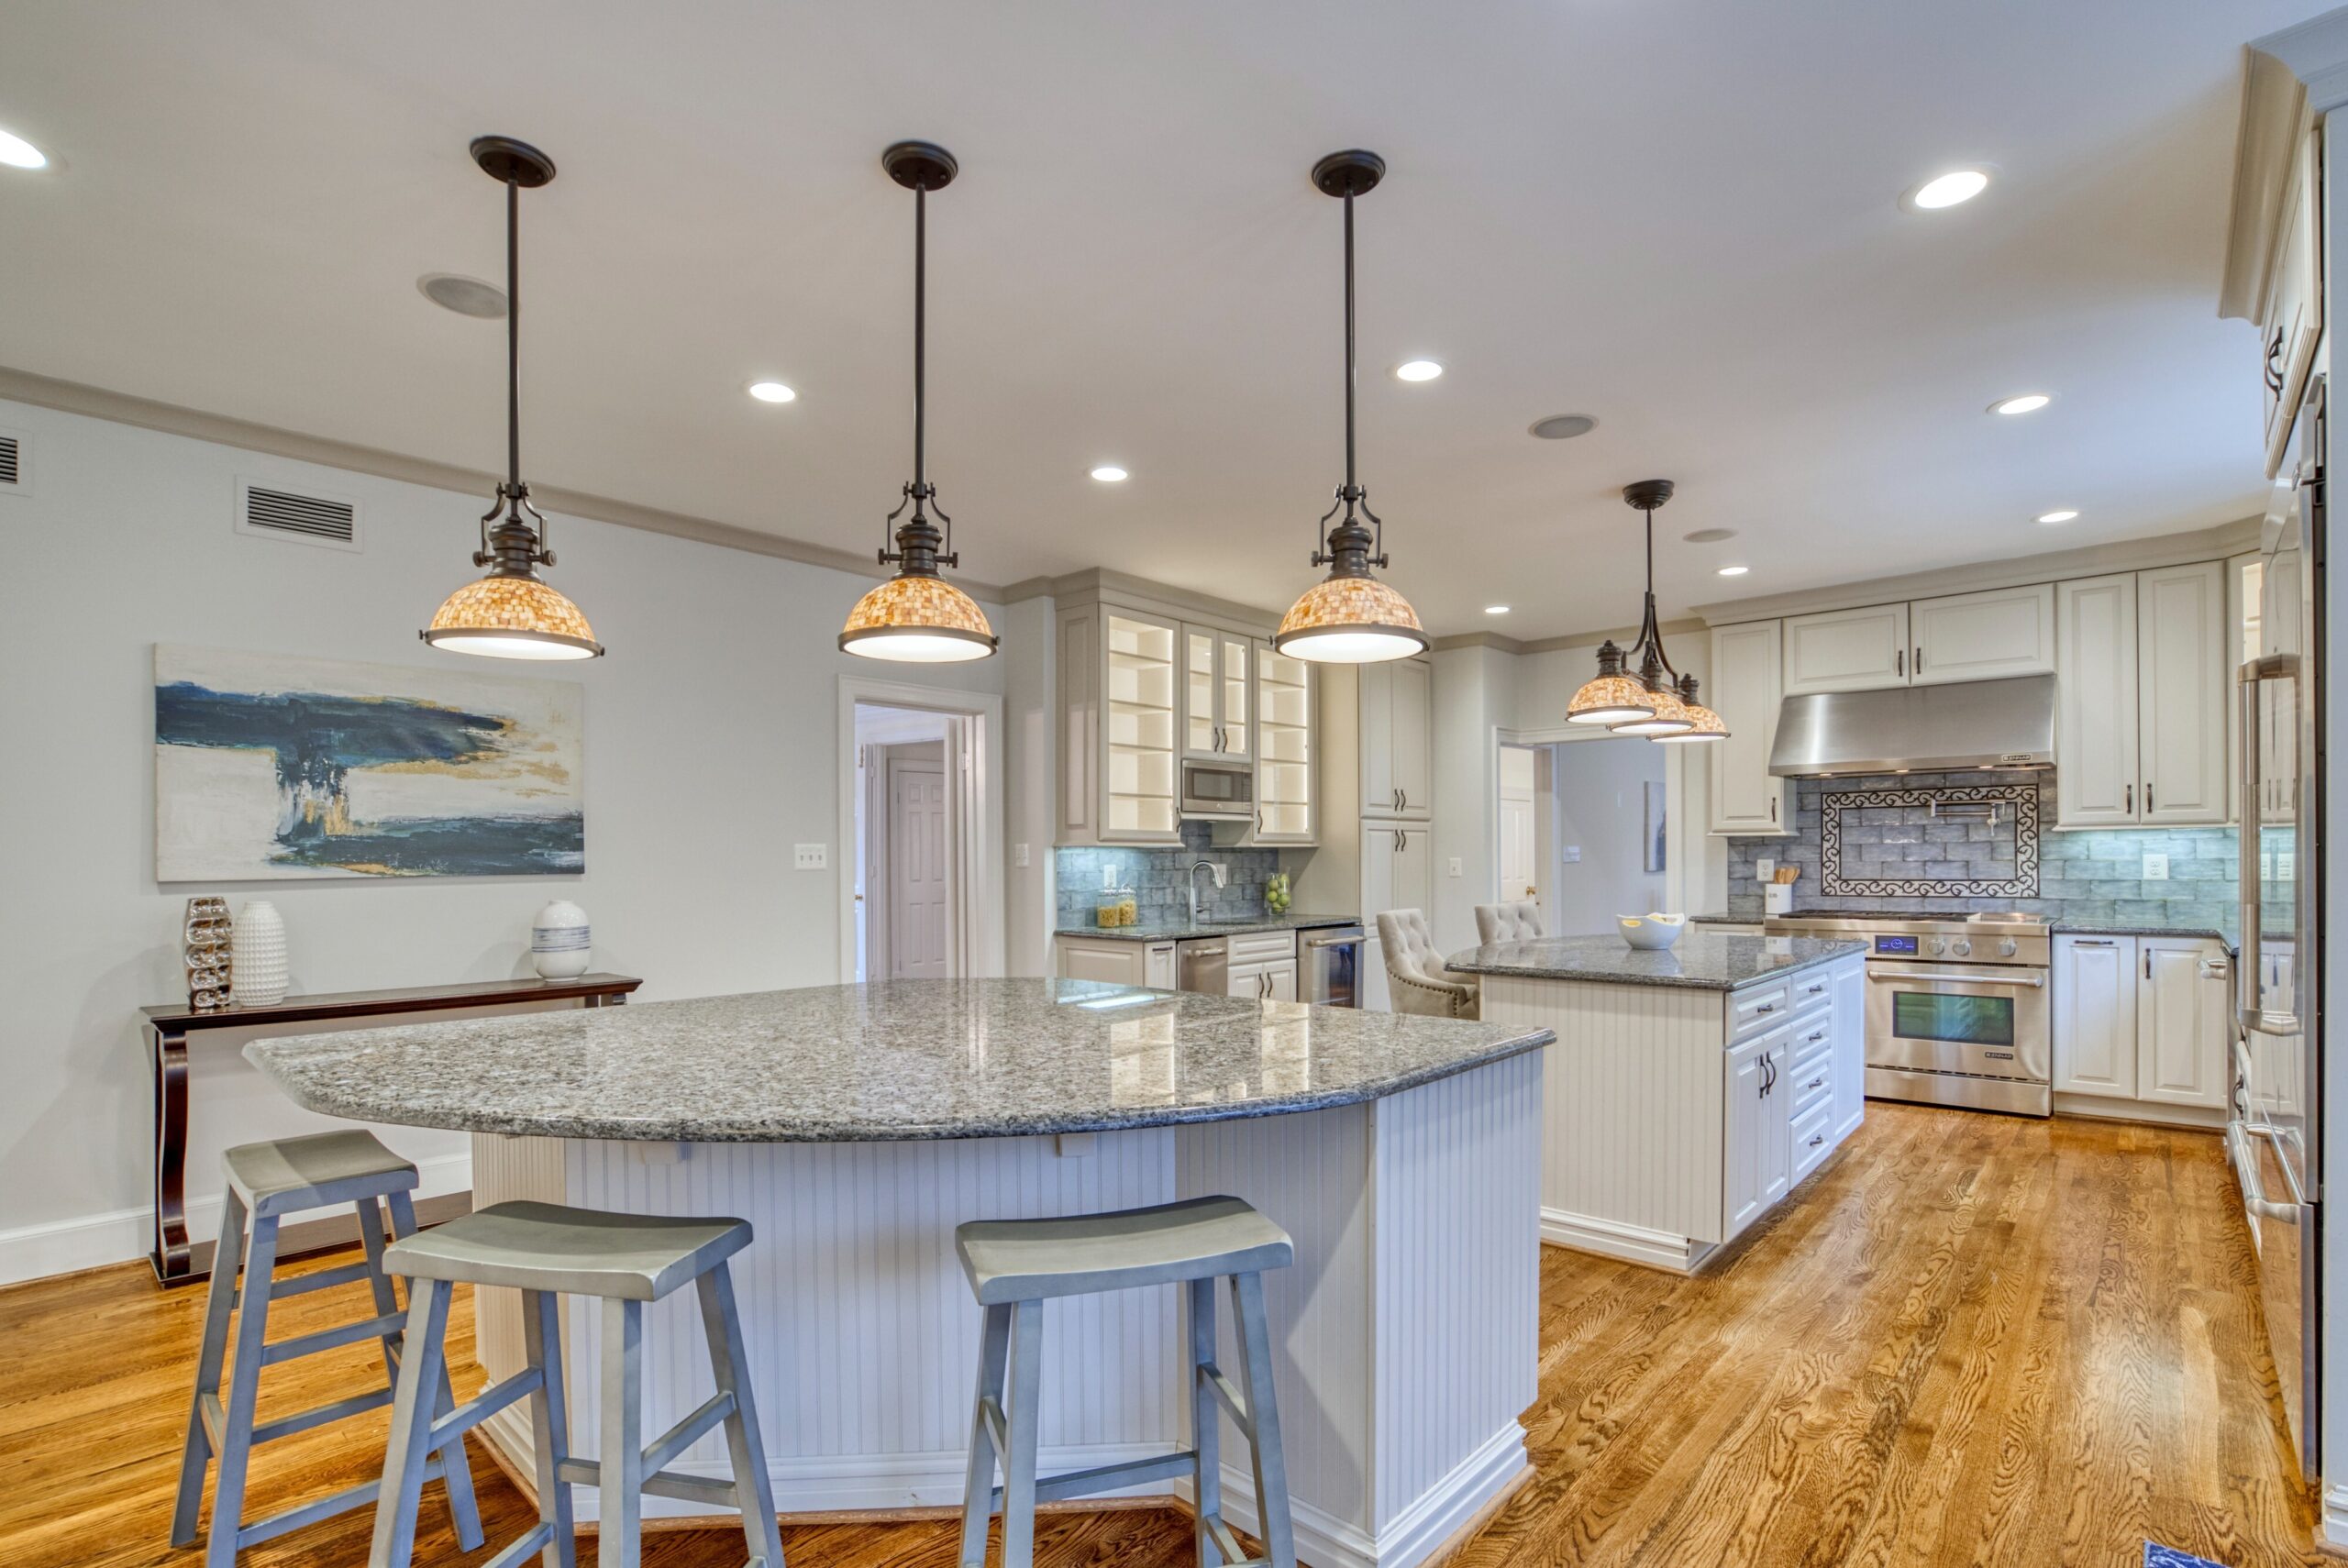 Professional interior photo of 718 Potomac Knolls Dr - showing the kitchen with TWO granite islands, luxury range and designer lighting